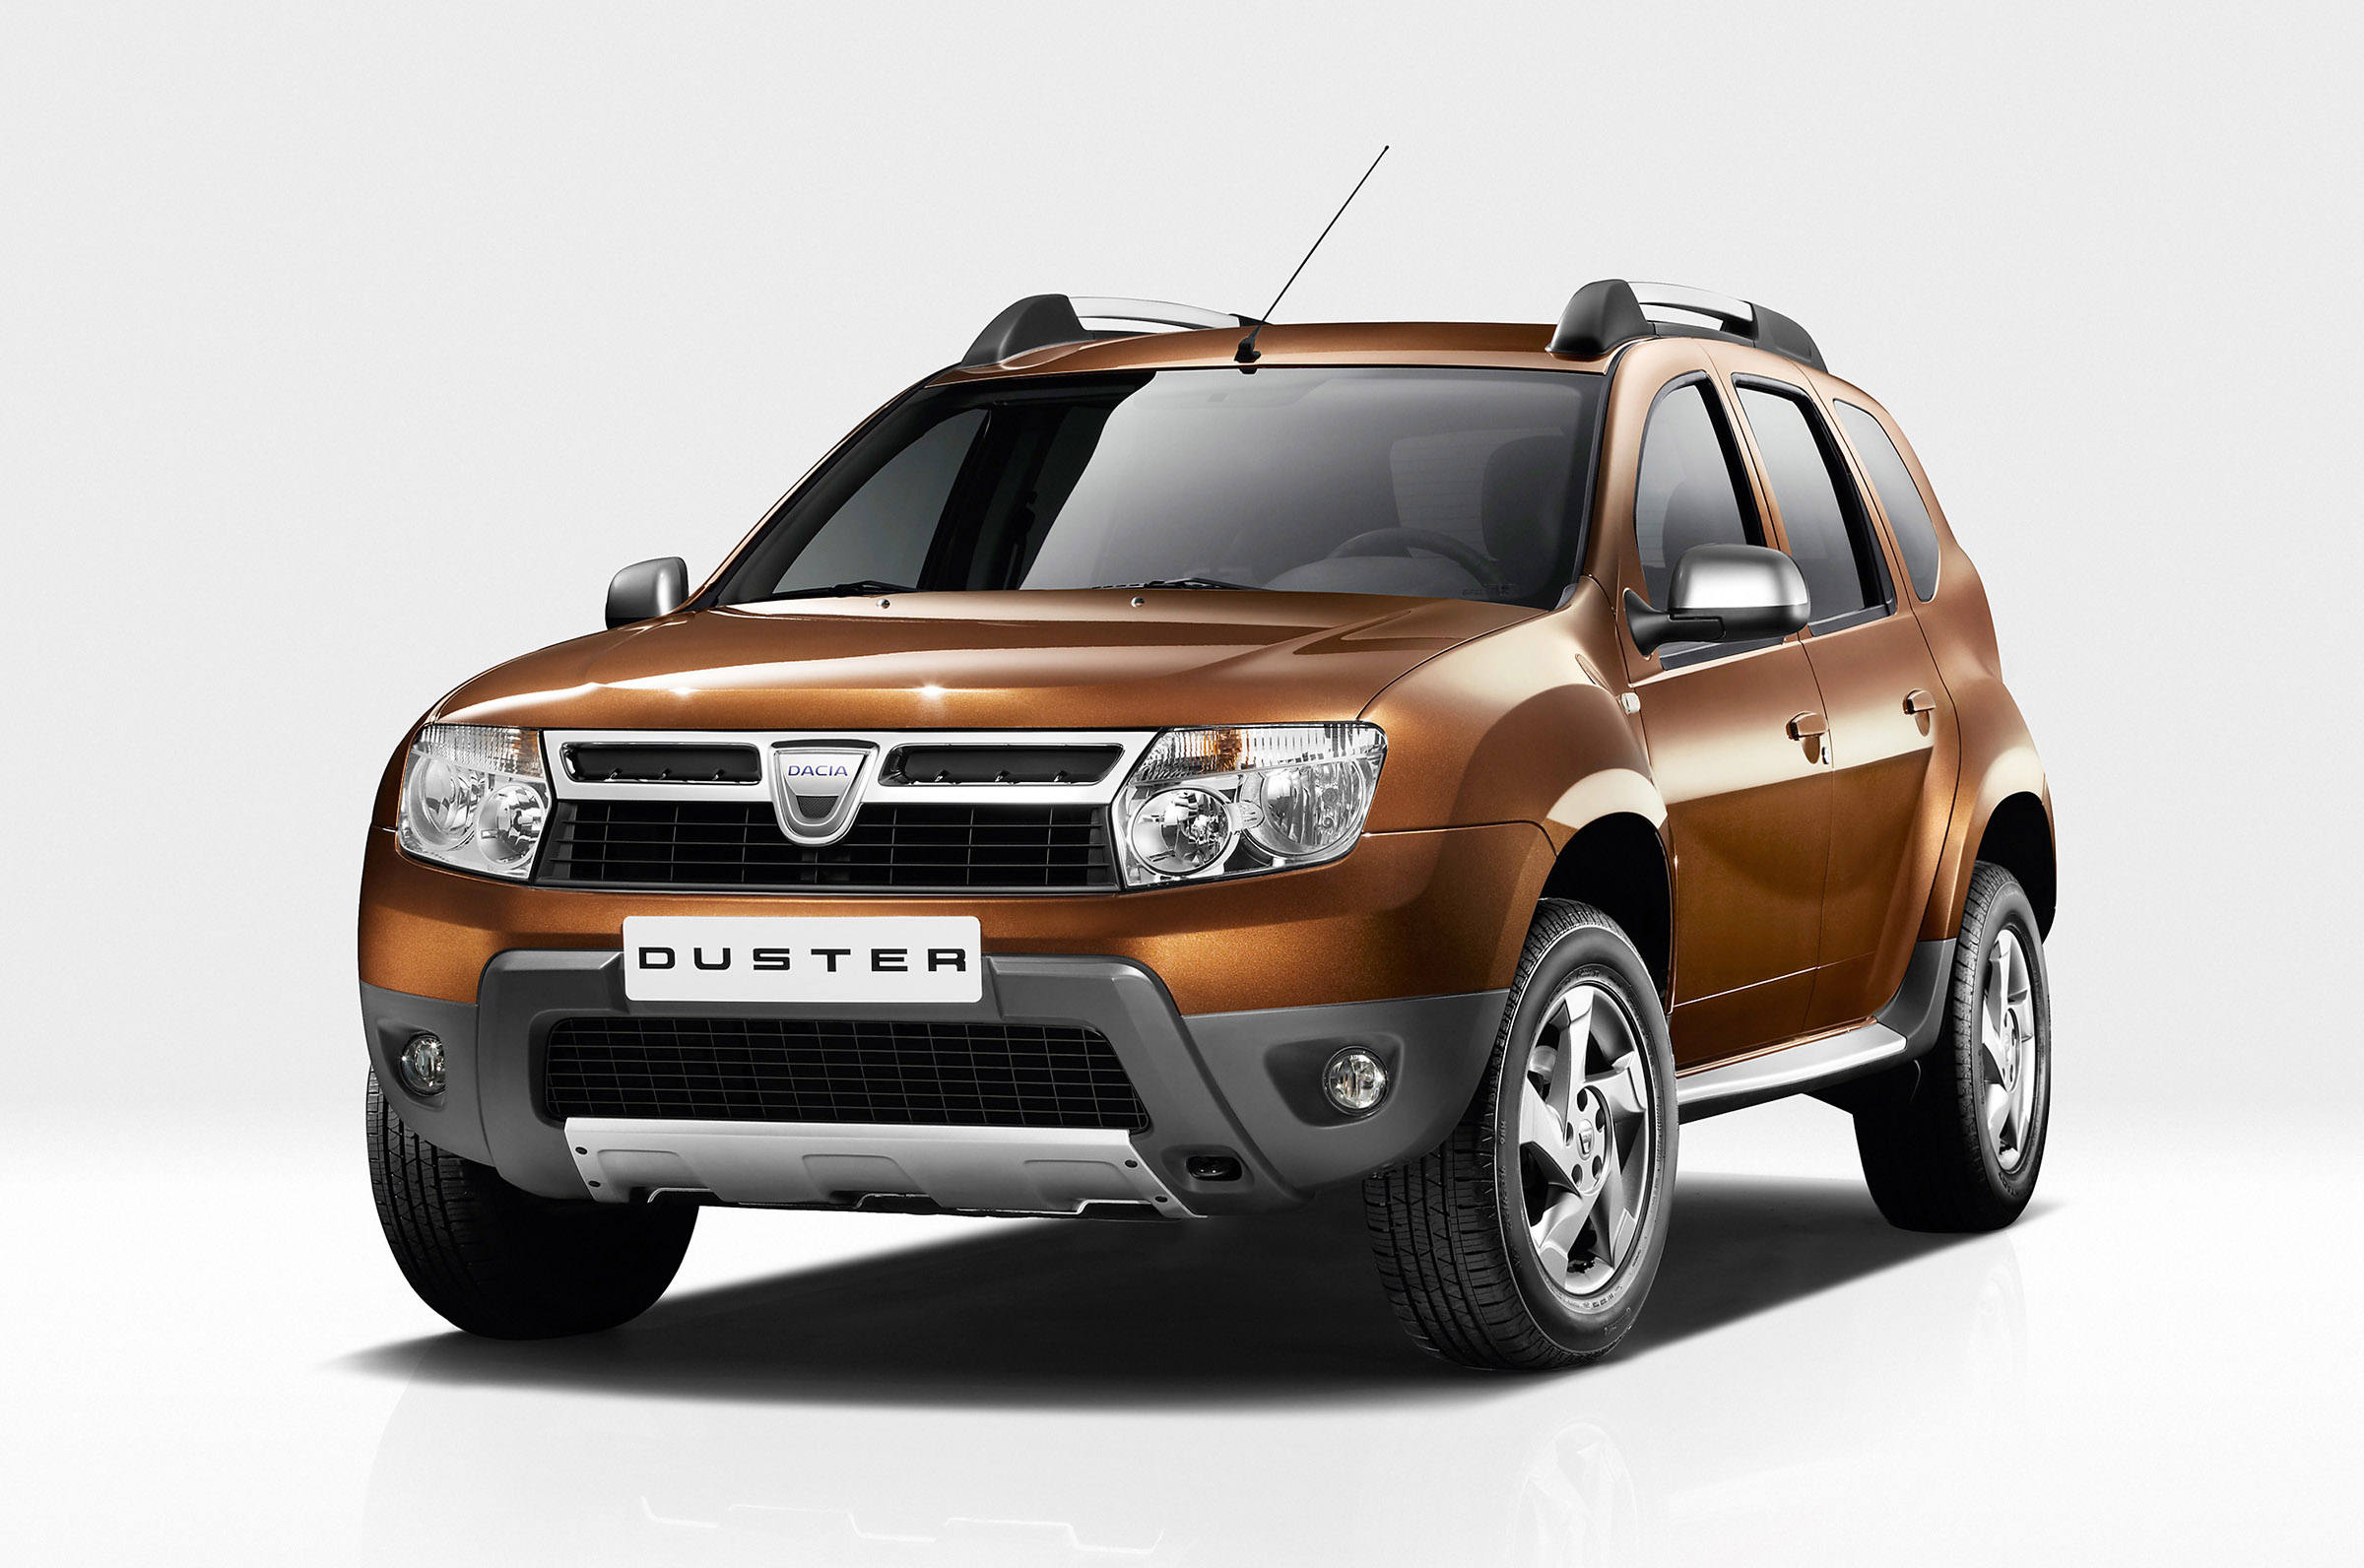 New Dacia Duster: The New Dacia Duster and his Interior 2012